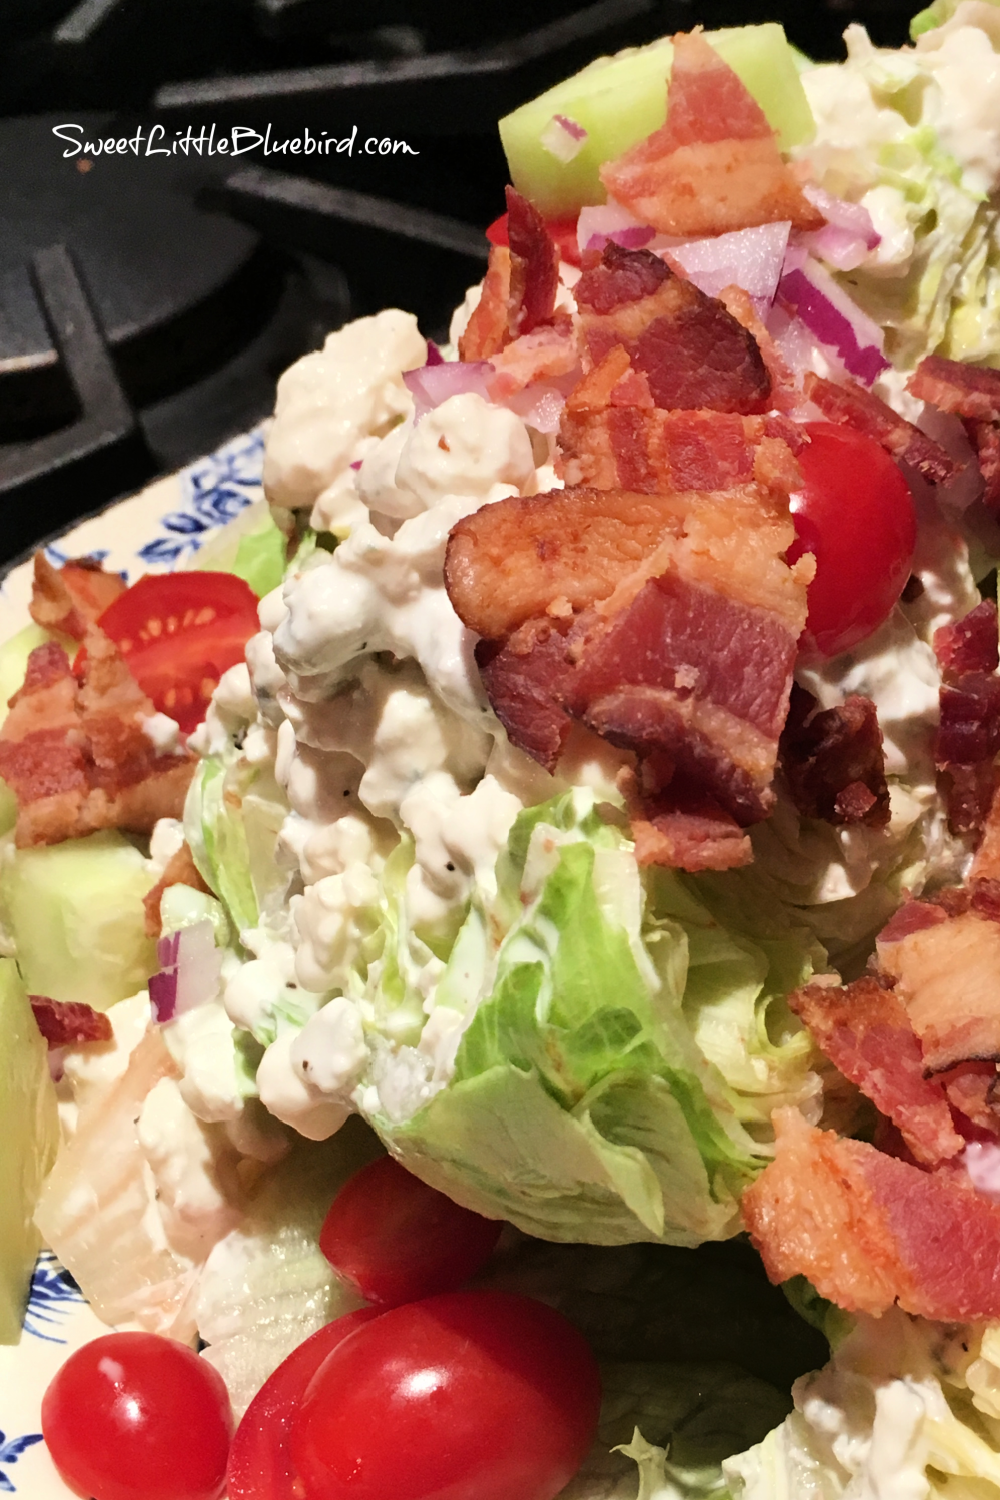 Classic Wedge Salad with Homemade Blue Cheese Dressing 